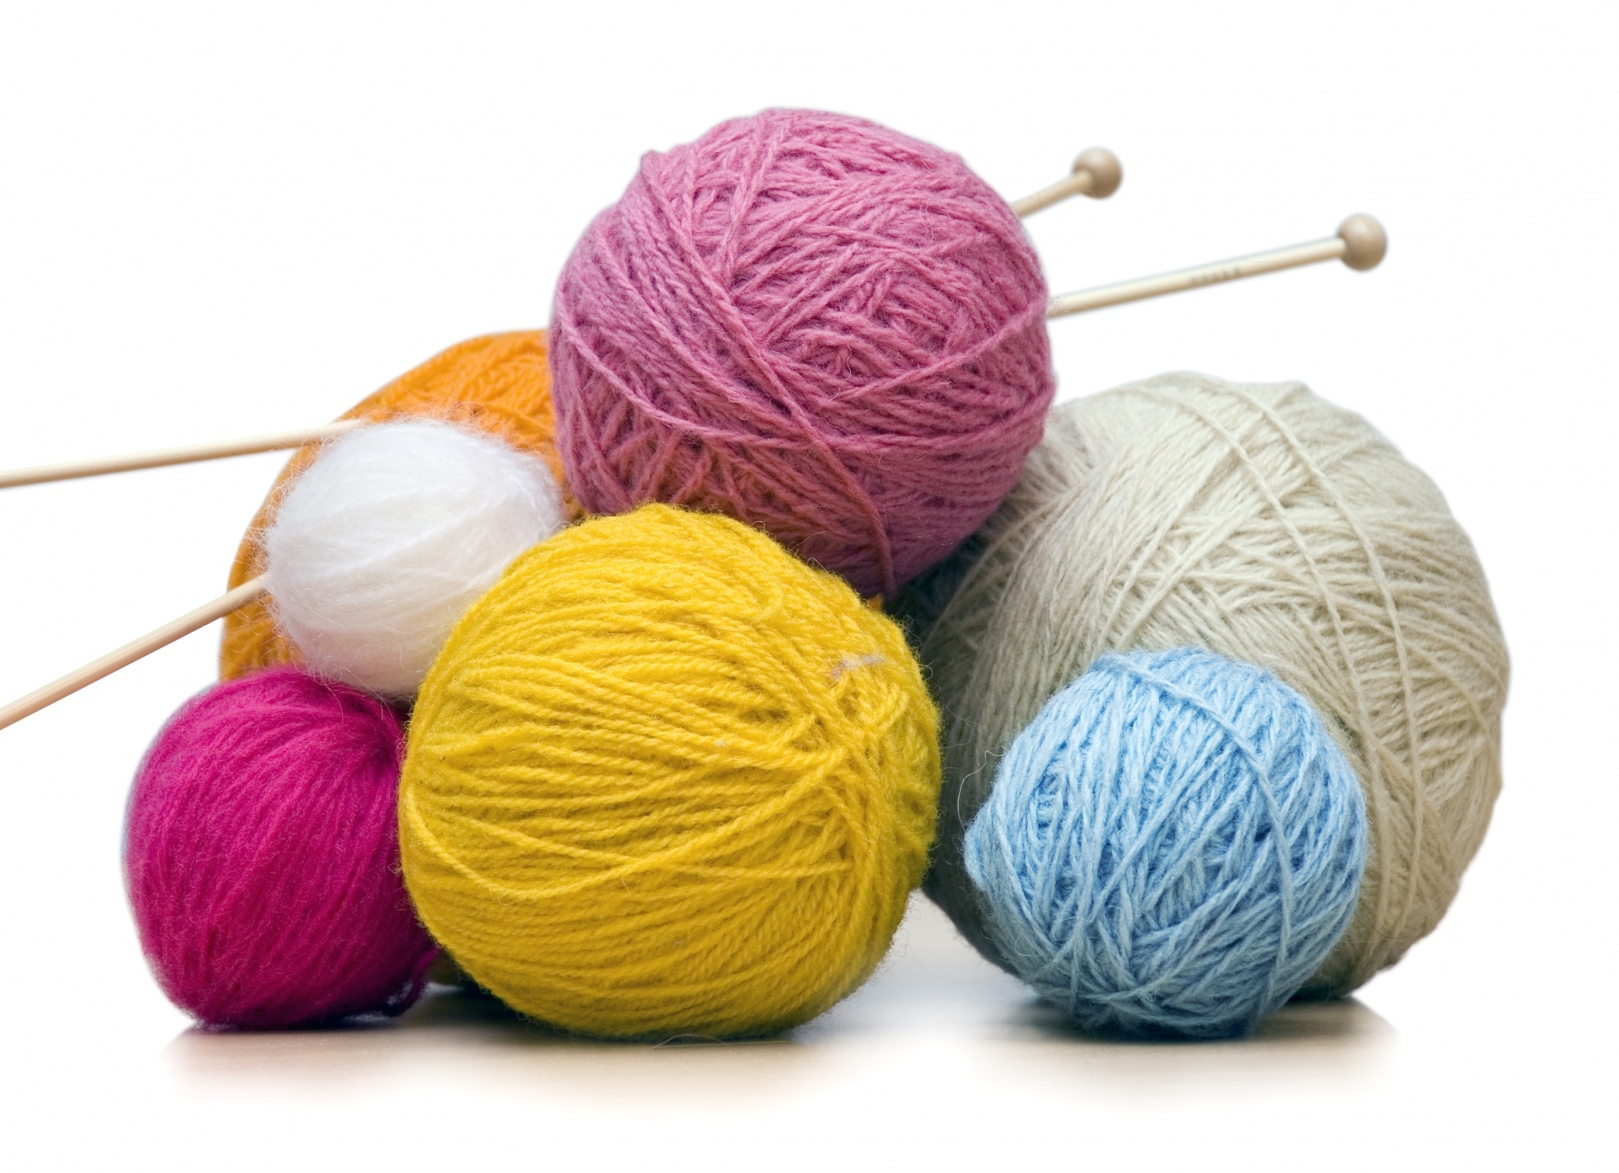 alt="balls of yarn in various colors & sizes with a pair of knitting needles sticking through one ball of yarn"